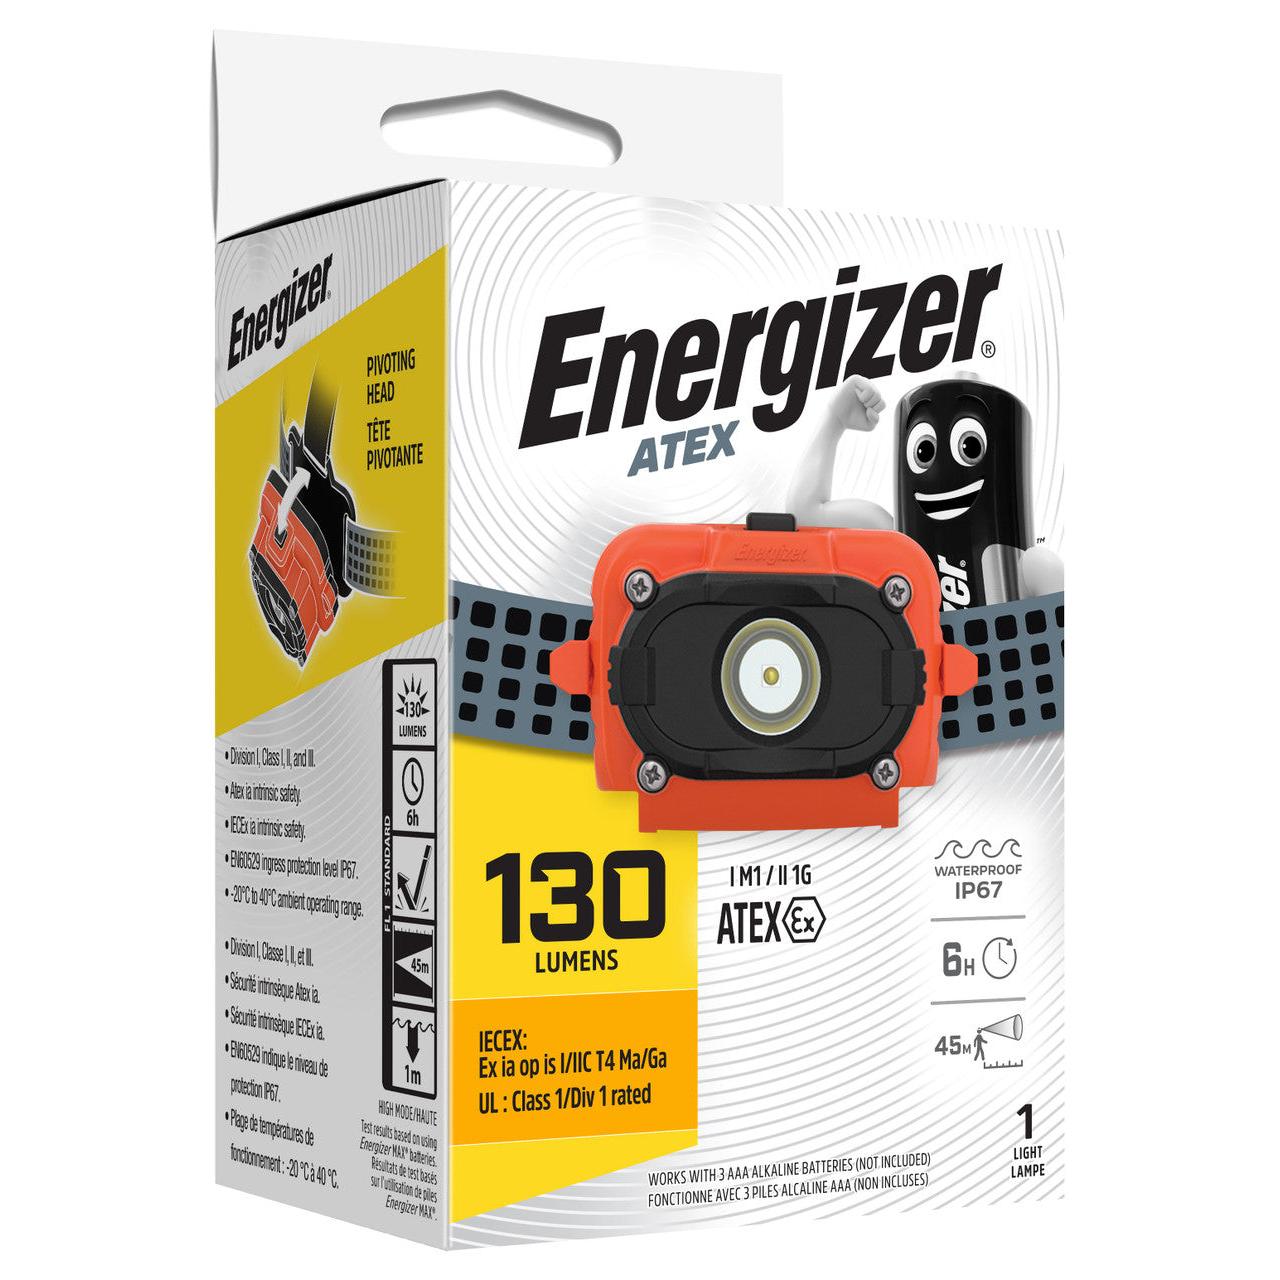 Energizer Atex Headlight 3aaa Intrinsically Safe Torch Flash Light E301380800 Power Tool Services